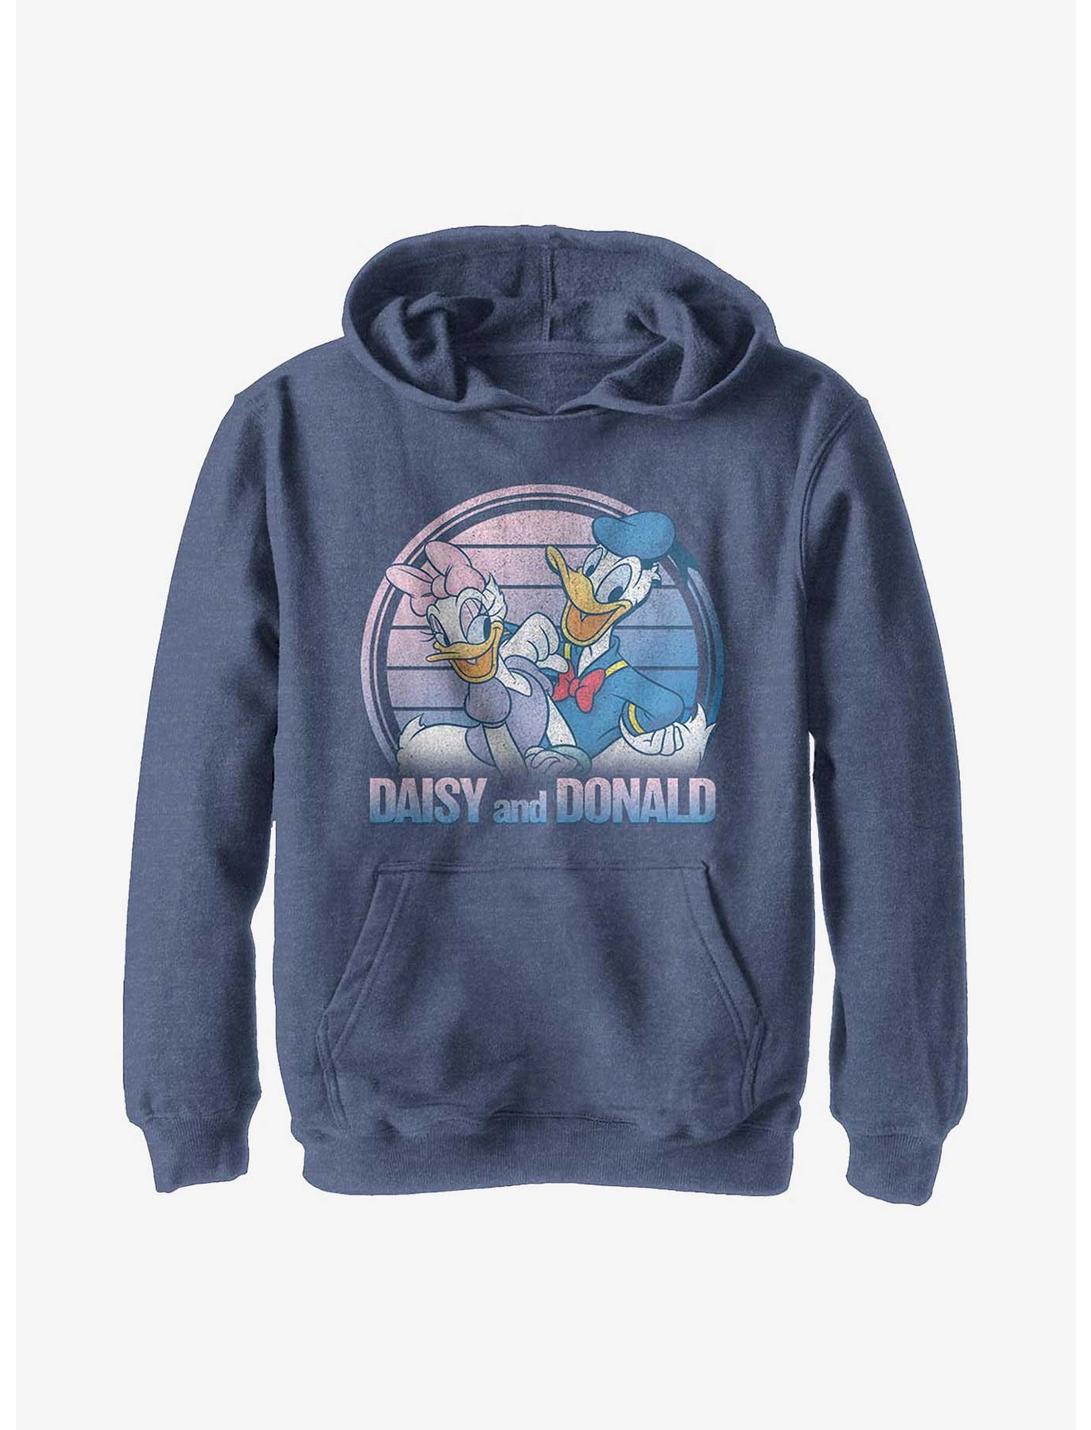 Disney Donald Duck Daisy And Donald Youth Hoodie, NAVY HTR, hi-res